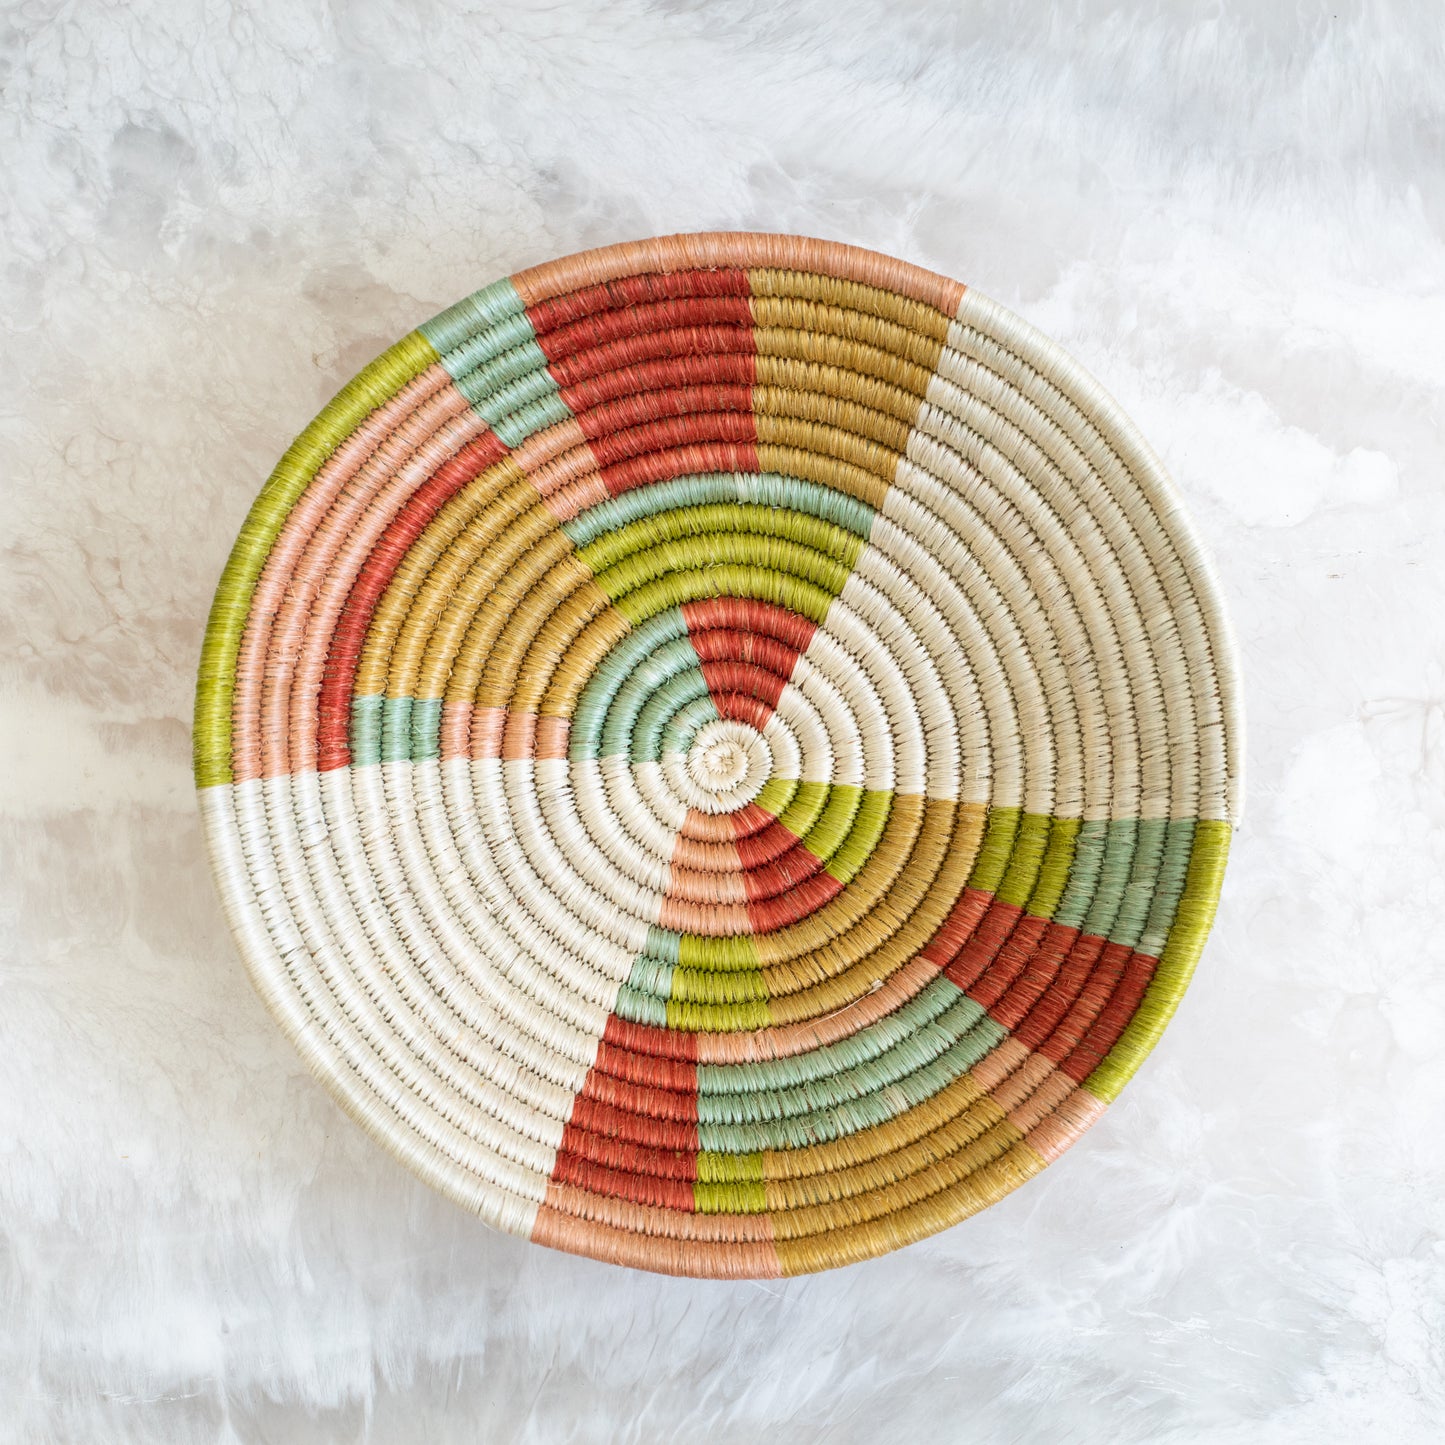 Town Square Woven Bowl in Patchwork - 10"